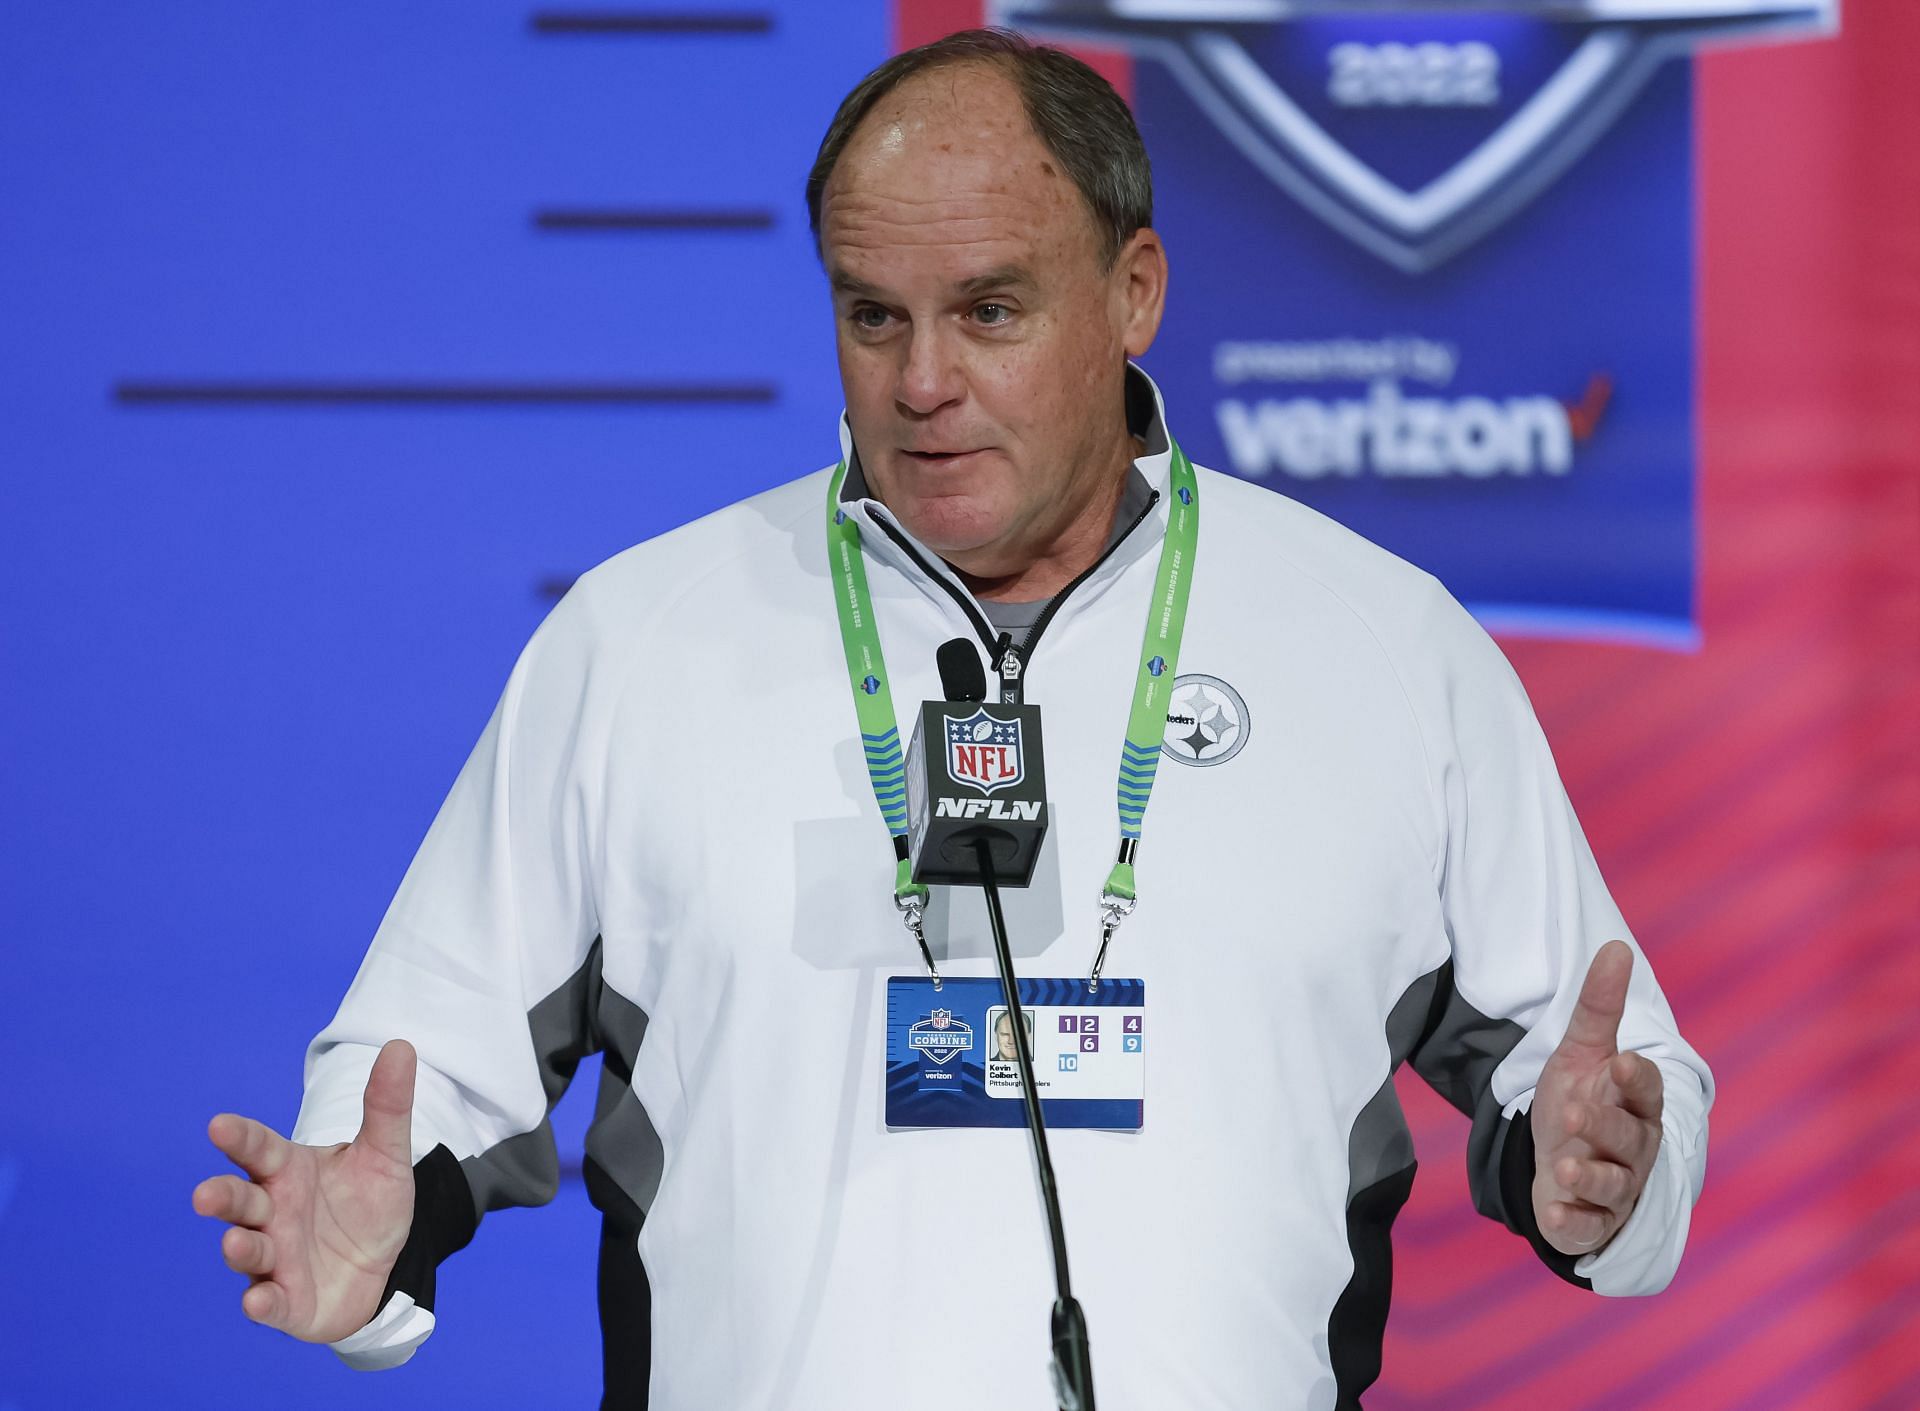 Kevin Colbert at the NFL Combine